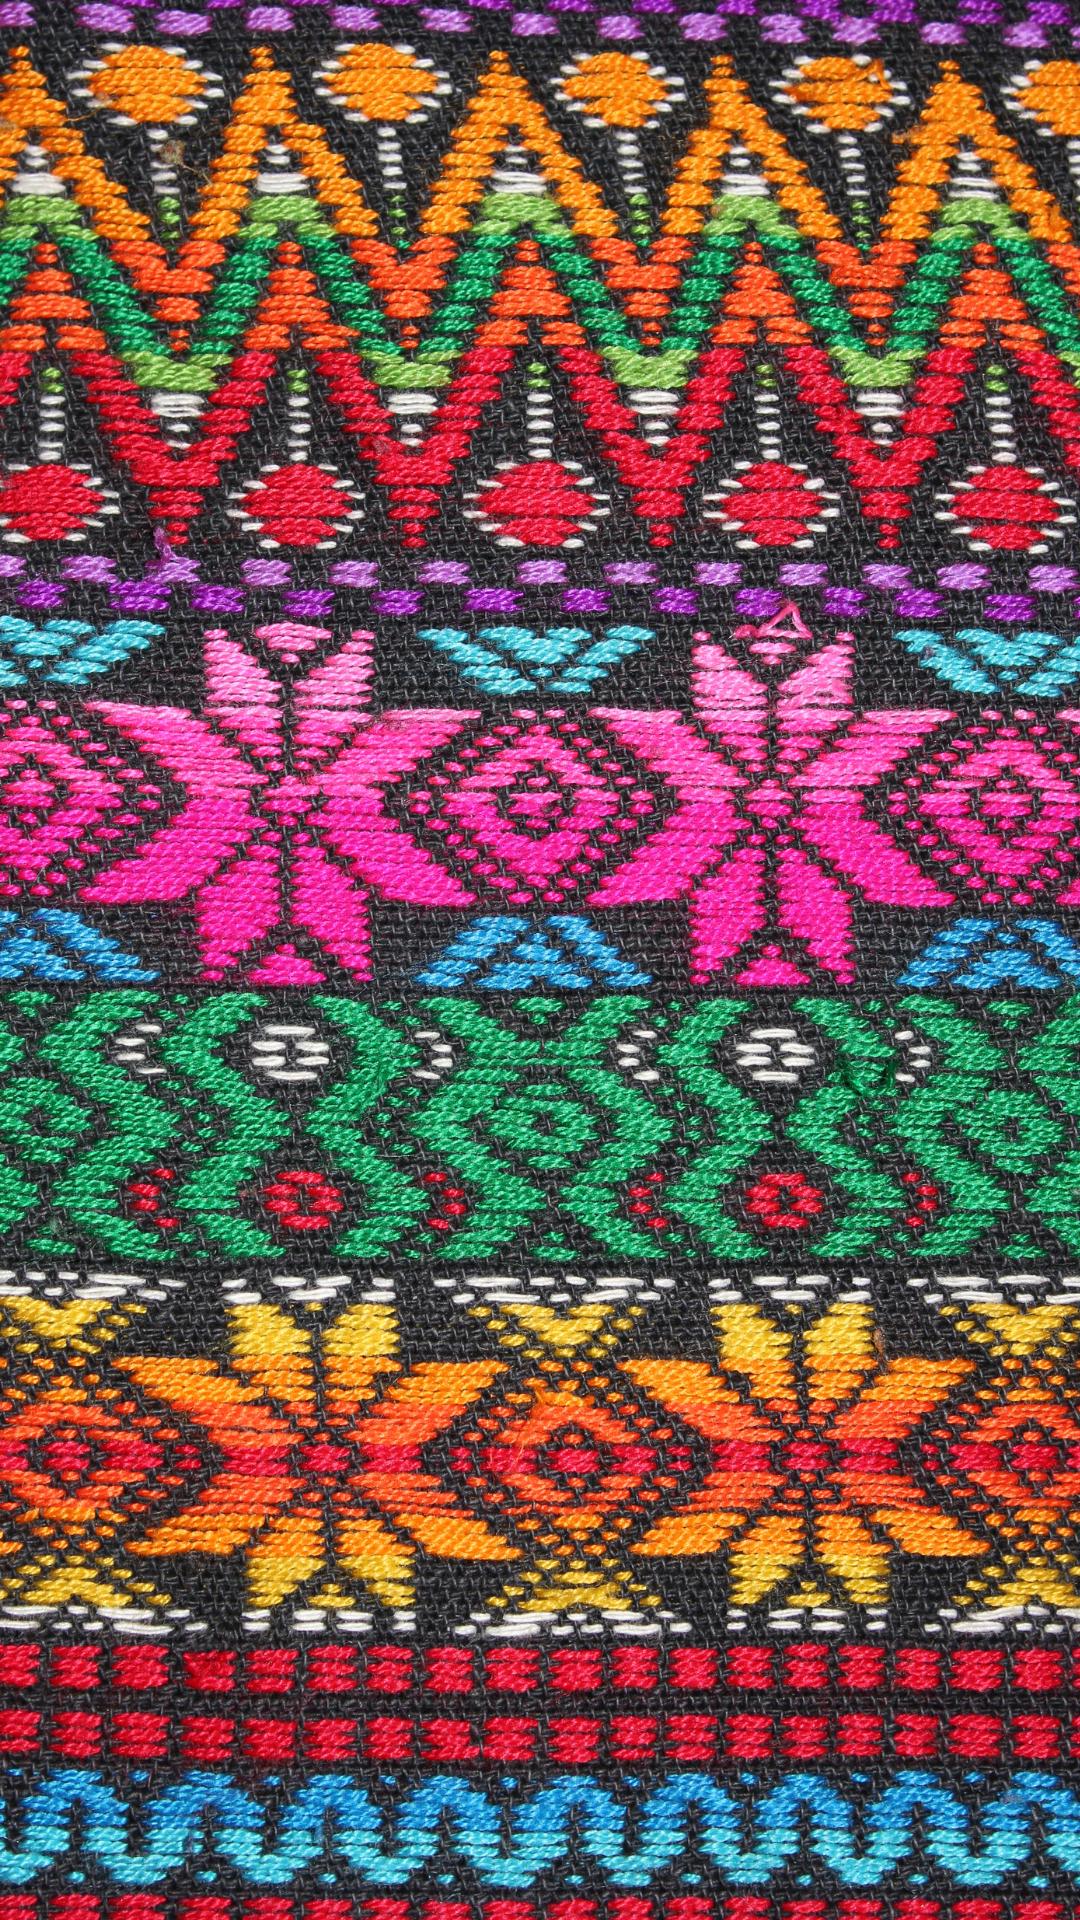 An image of a colorful fabric with a zigzag pattern. - Indie